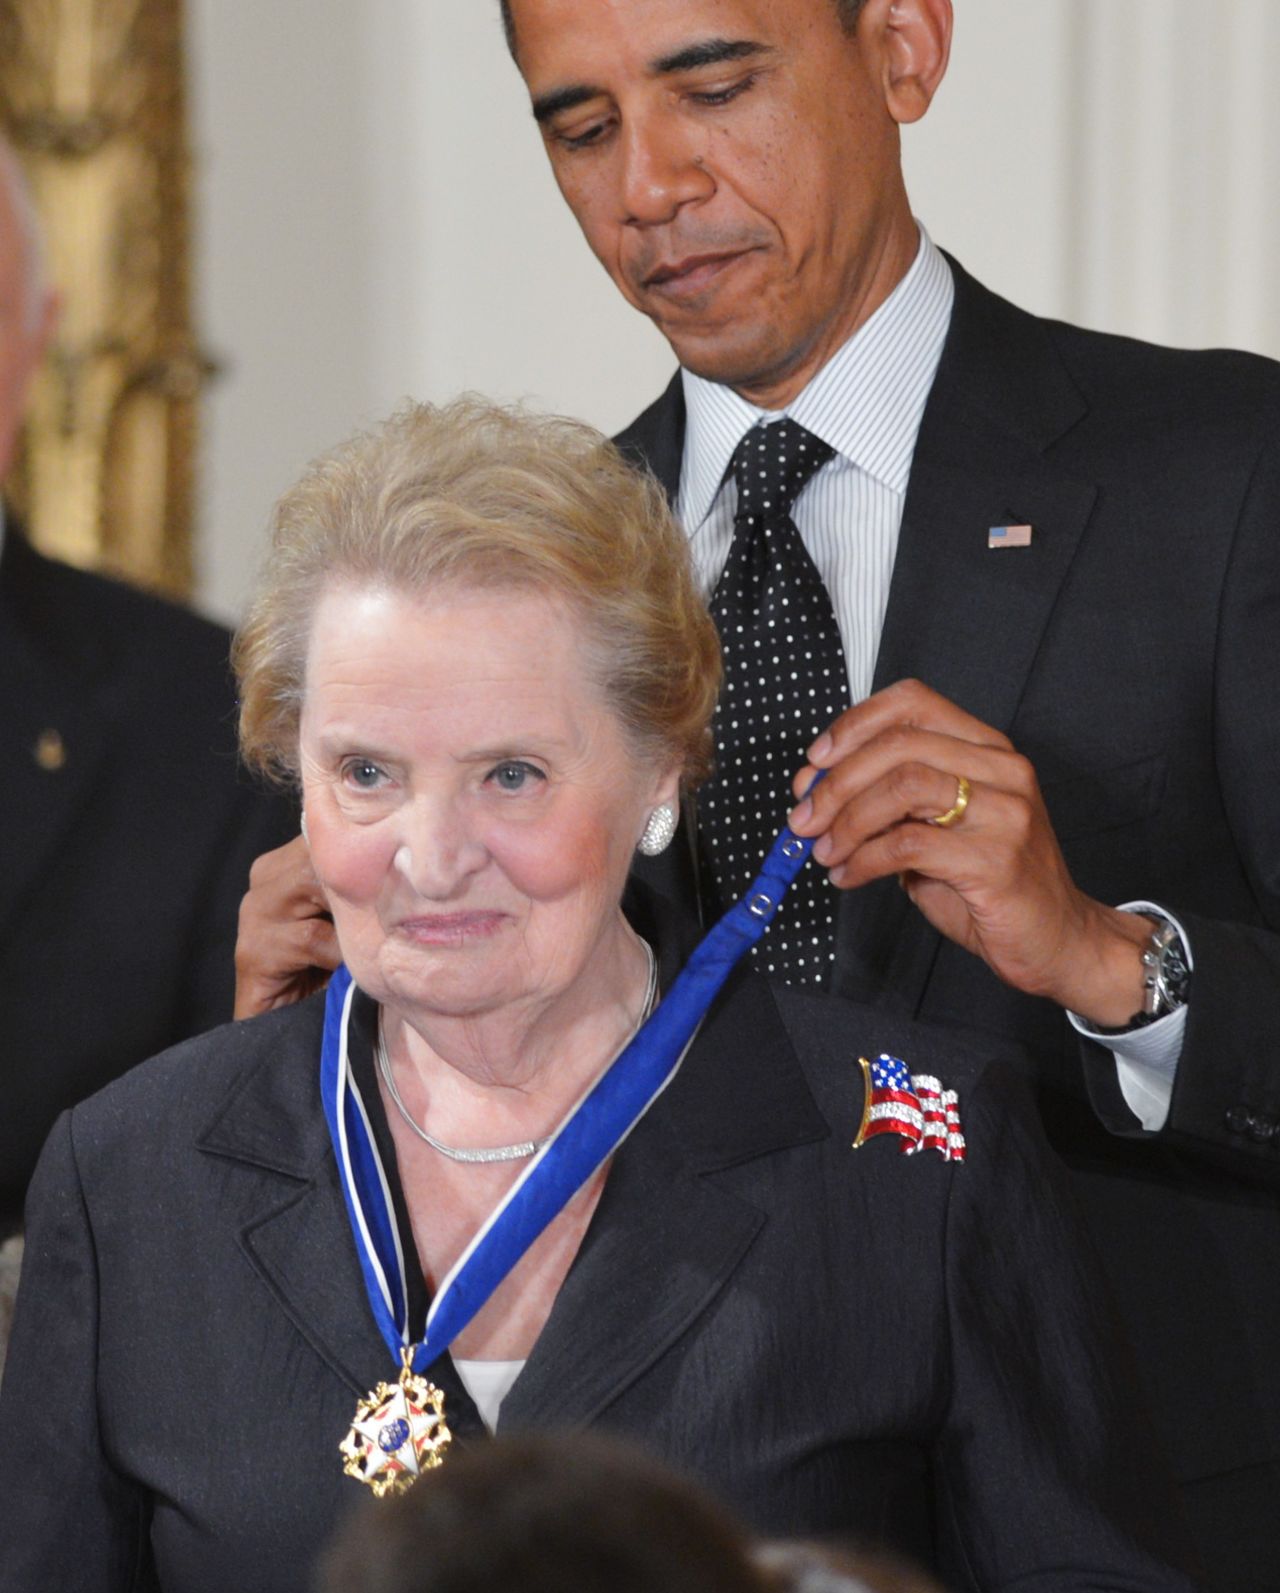 Madeleine Albright served as the first female U.S. secretary of state from 1997-2001 under President Bill Clinton. While in office, she worked to expand NATO and helped lead the alliance's campaign against terror and ethnic cleansing in the Balkans, pursued peace in the Middle East and Africa, sought to reduce the dangerous spread of nuclear weapons and was a champion of democracy, human rights and good governance across the globe.